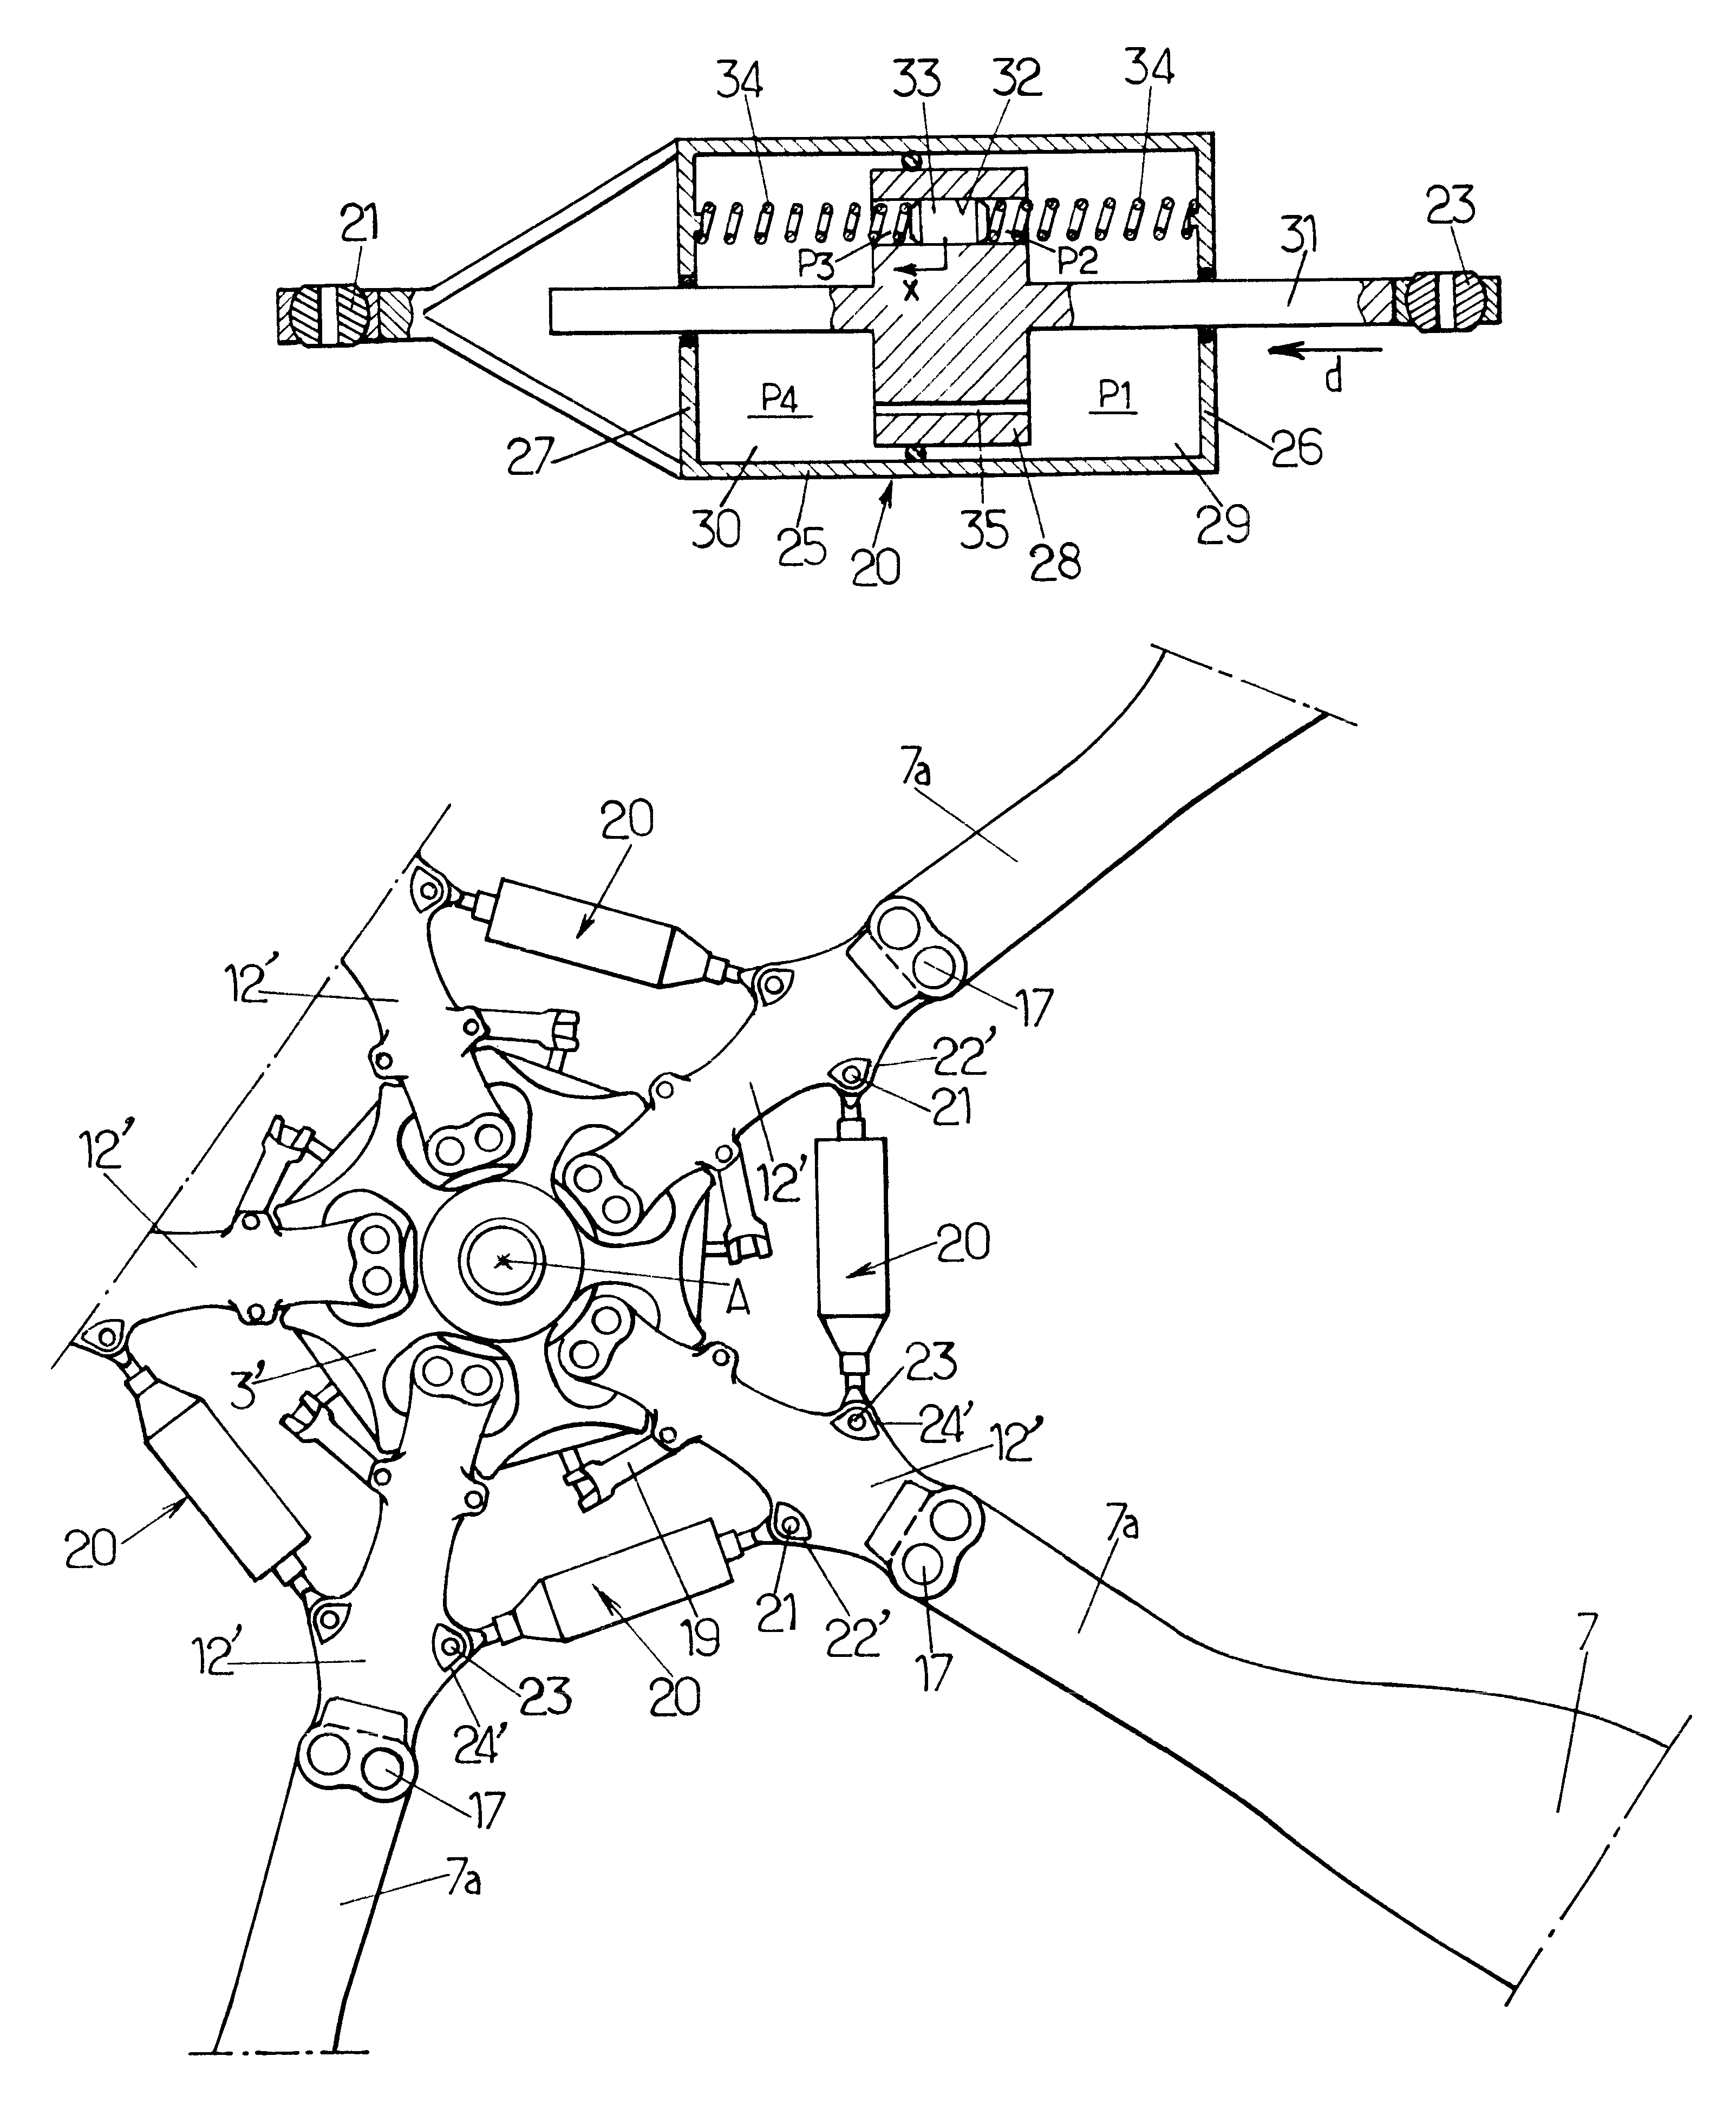 Dual piston drag damper for rotary-wing aircraft rotor